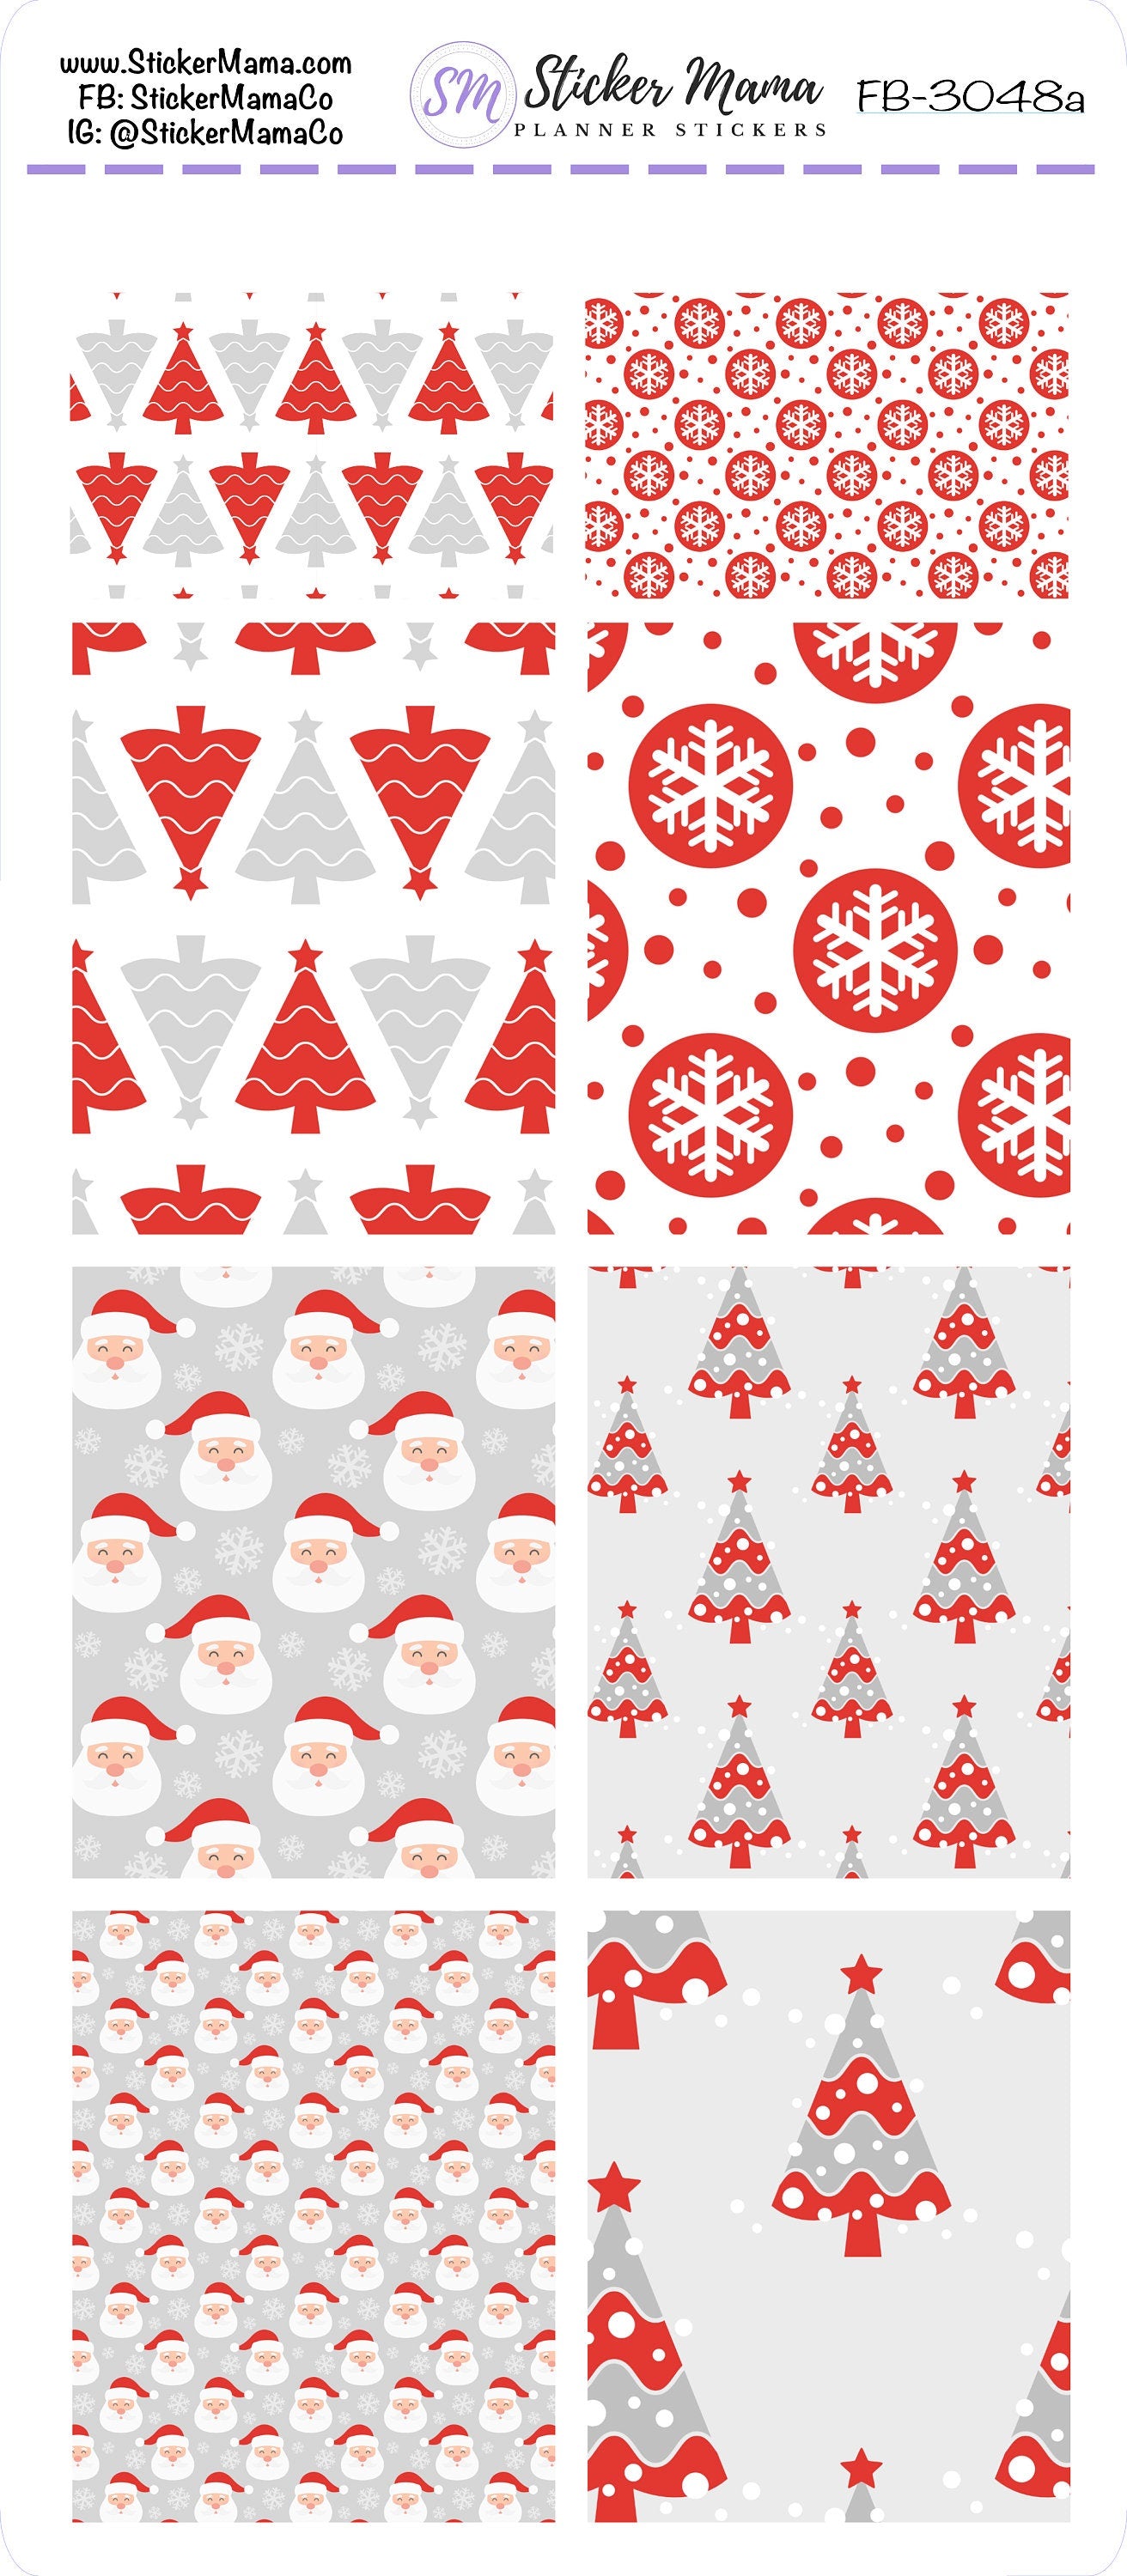 FB-3048 - FULL BOX Stickers - New Christmas - Planner Stickers - Full Box for Planners